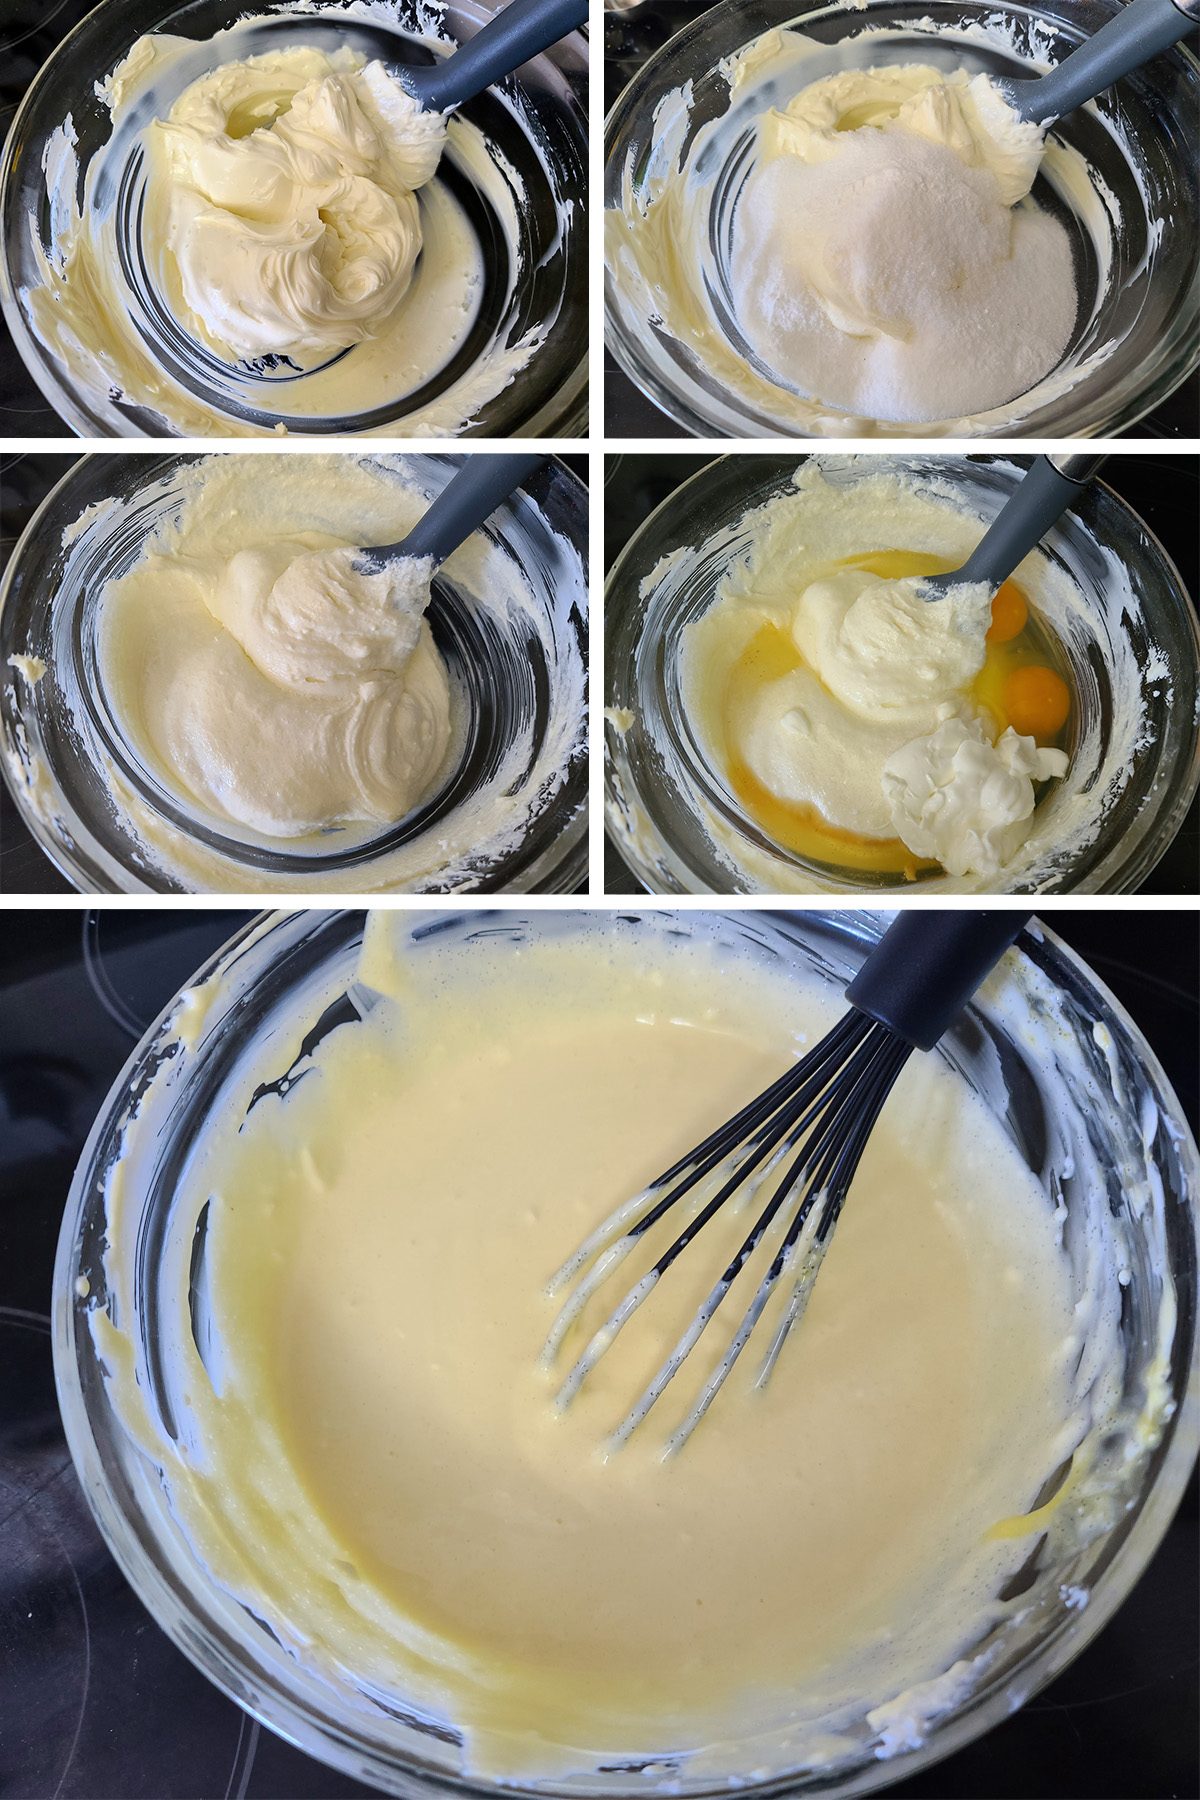 A 5 part image showing the cheesecake batter being mixed with a whisk.